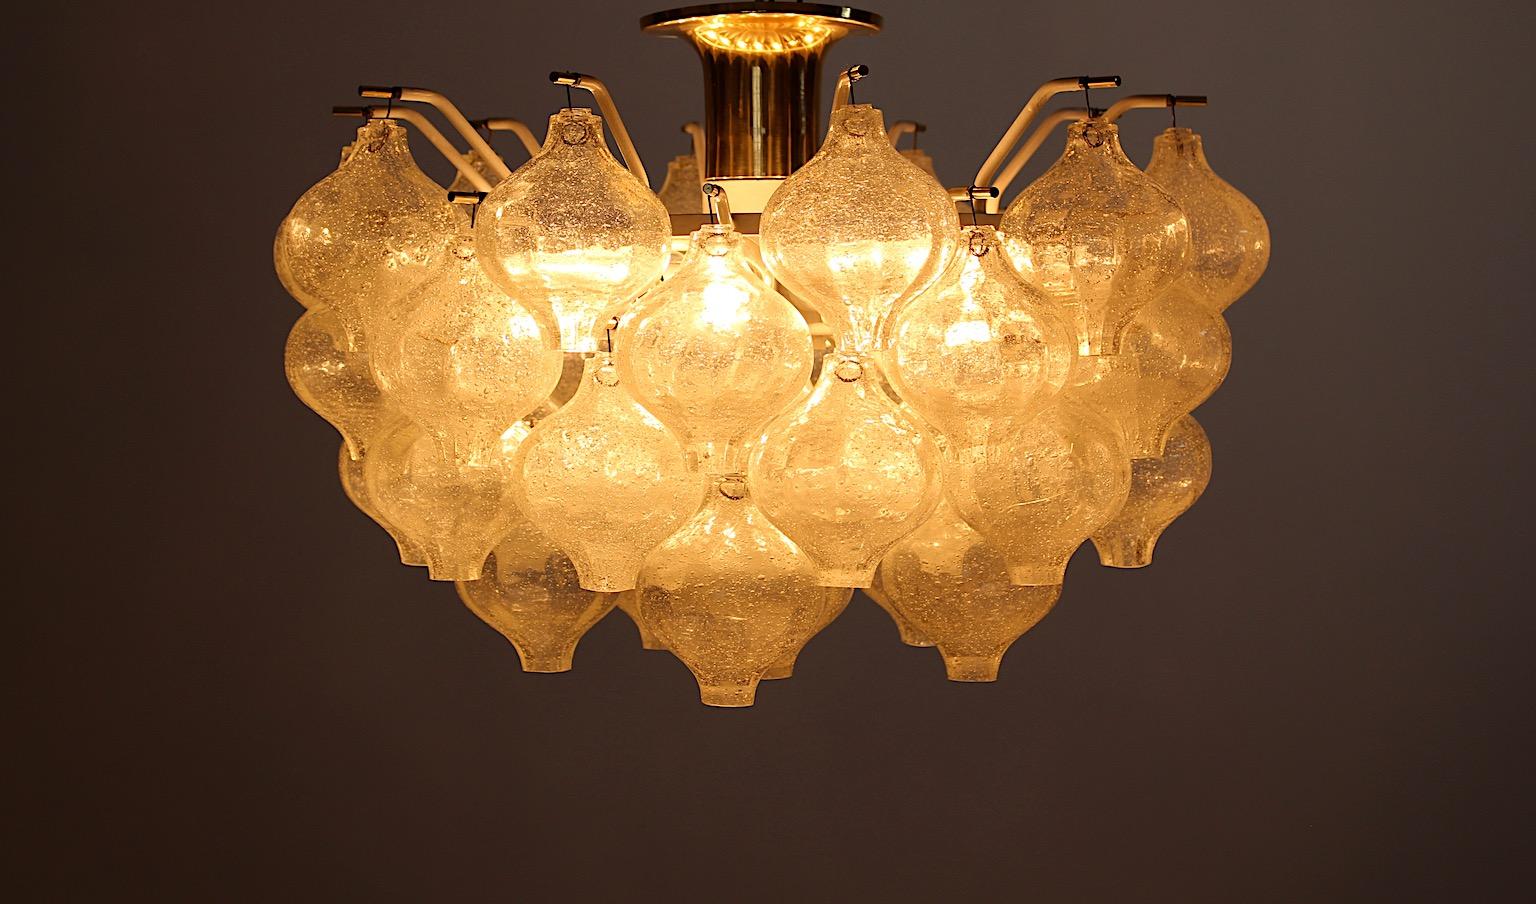 Mid Century Modern vintage flush mount or chandelier Tulipan from brass and glass by Kalmar Austria, Vienna, 1960s.
An amazing and delicate flush mount or chandelier with forty ( 40 ) 
handblown glass objects, which are fixed on the white lacquered